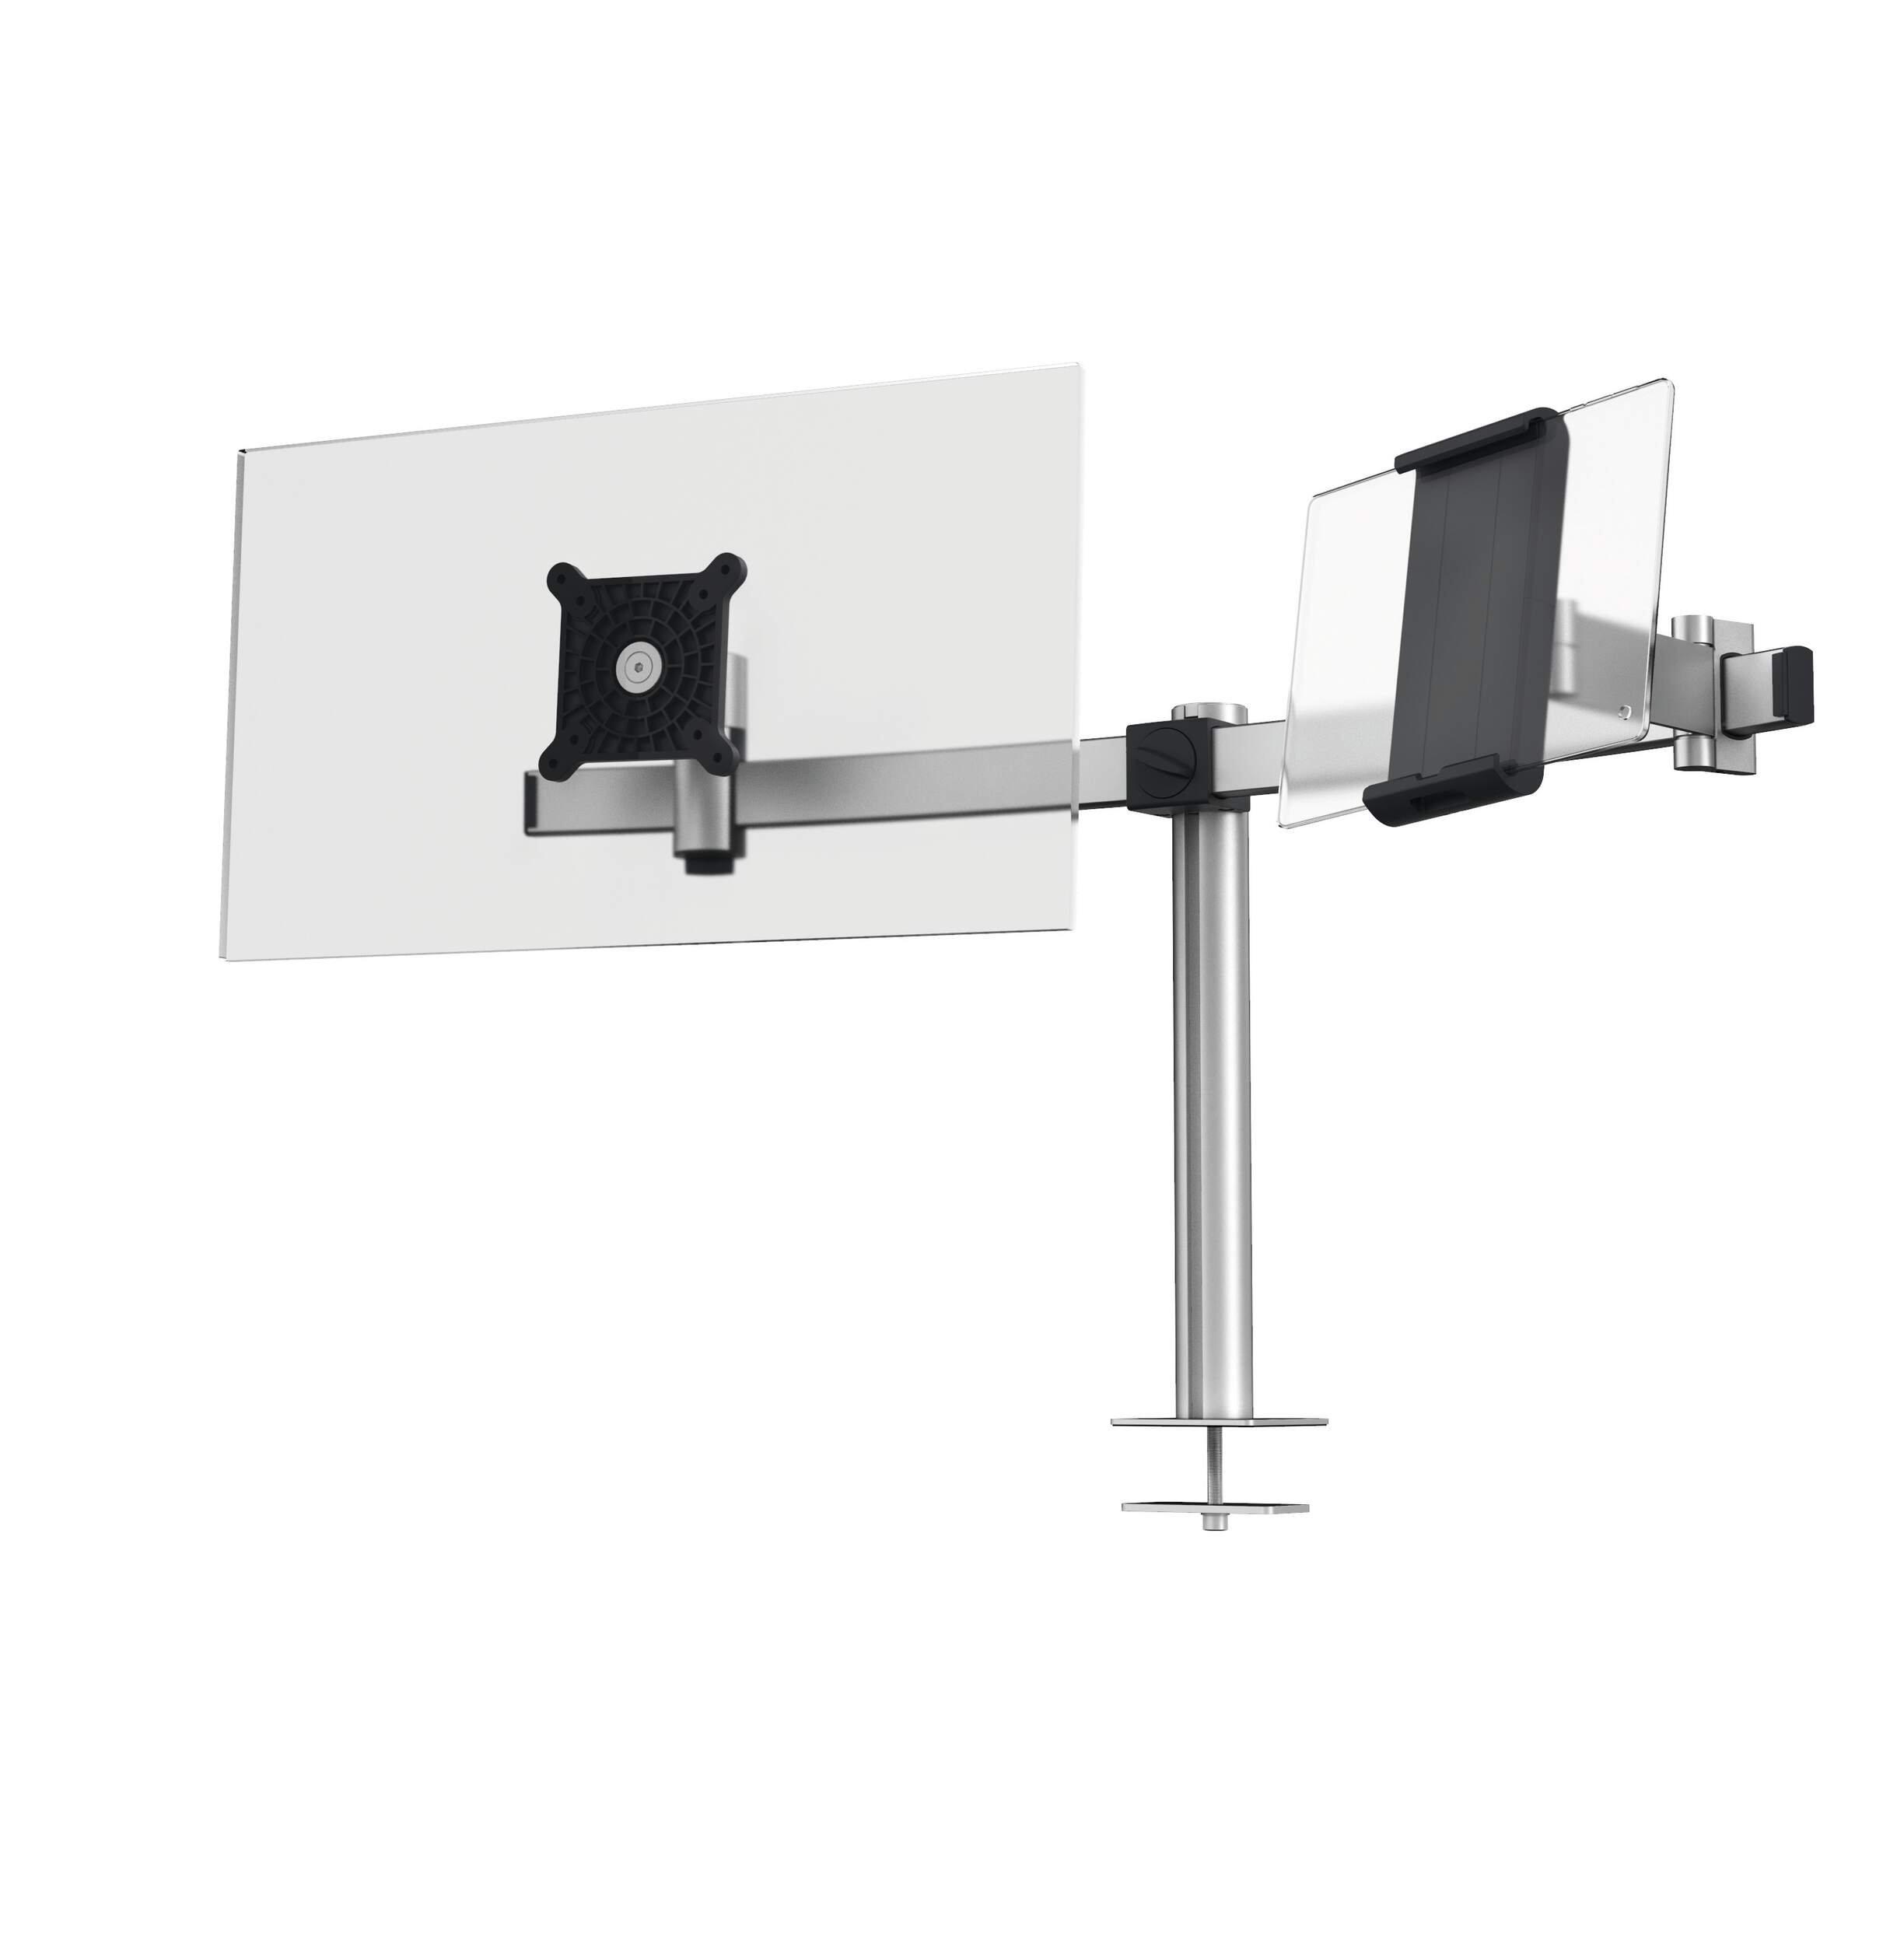 Monitor Mount for 1 Screen & 1 Tablet - Through-Desk Clamp Attachment